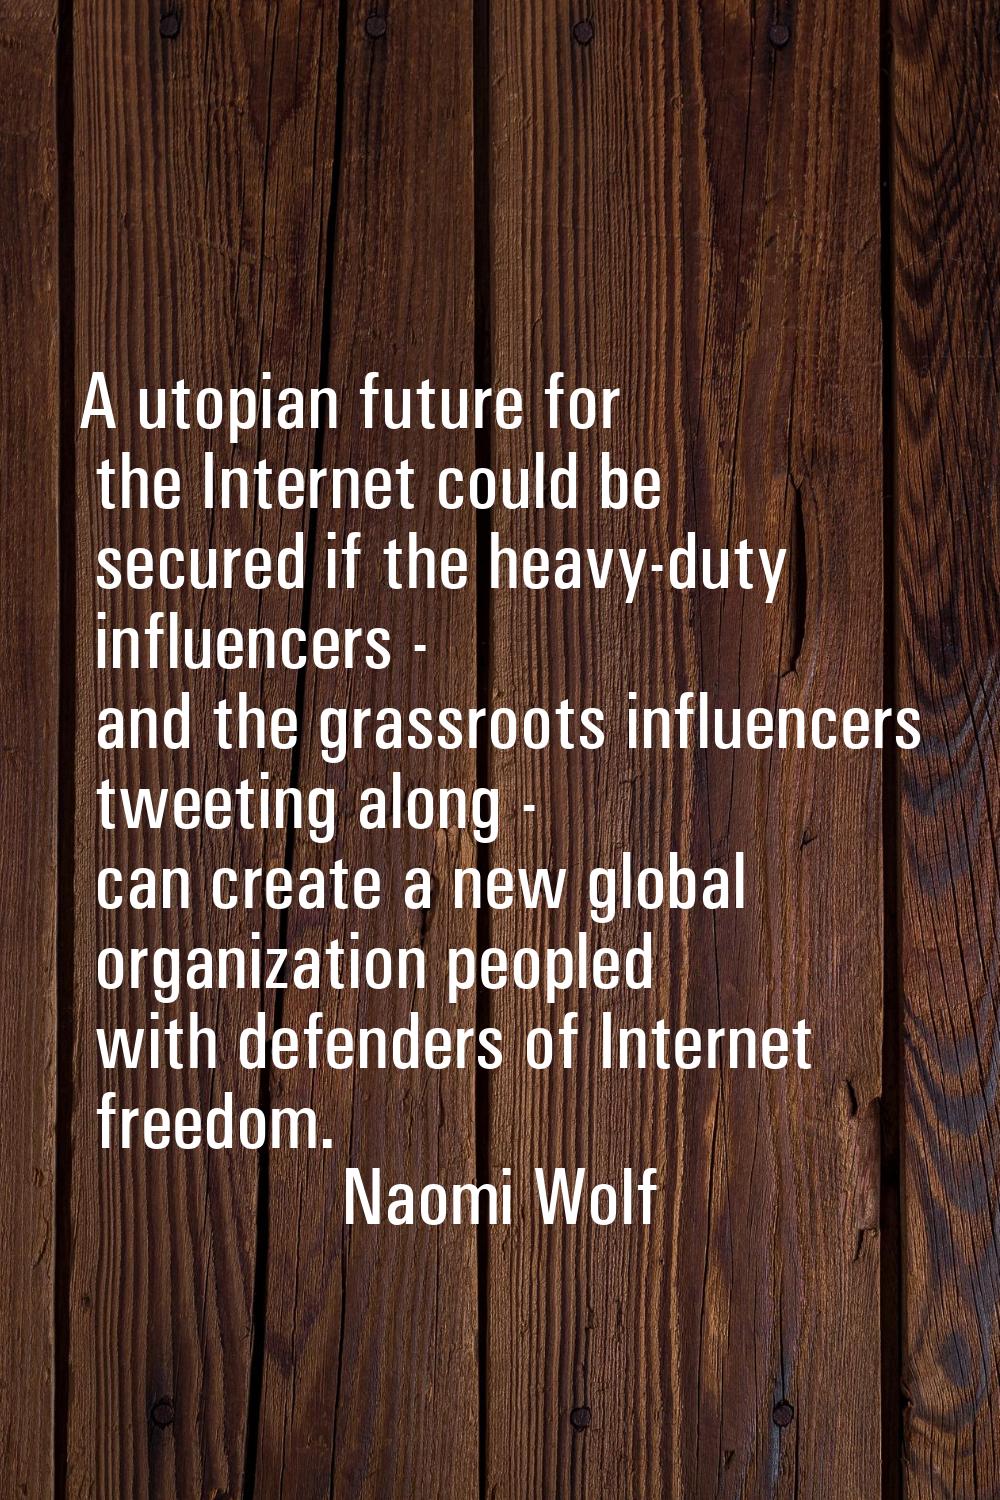 A utopian future for the Internet could be secured if the heavy-duty influencers - and the grassroo